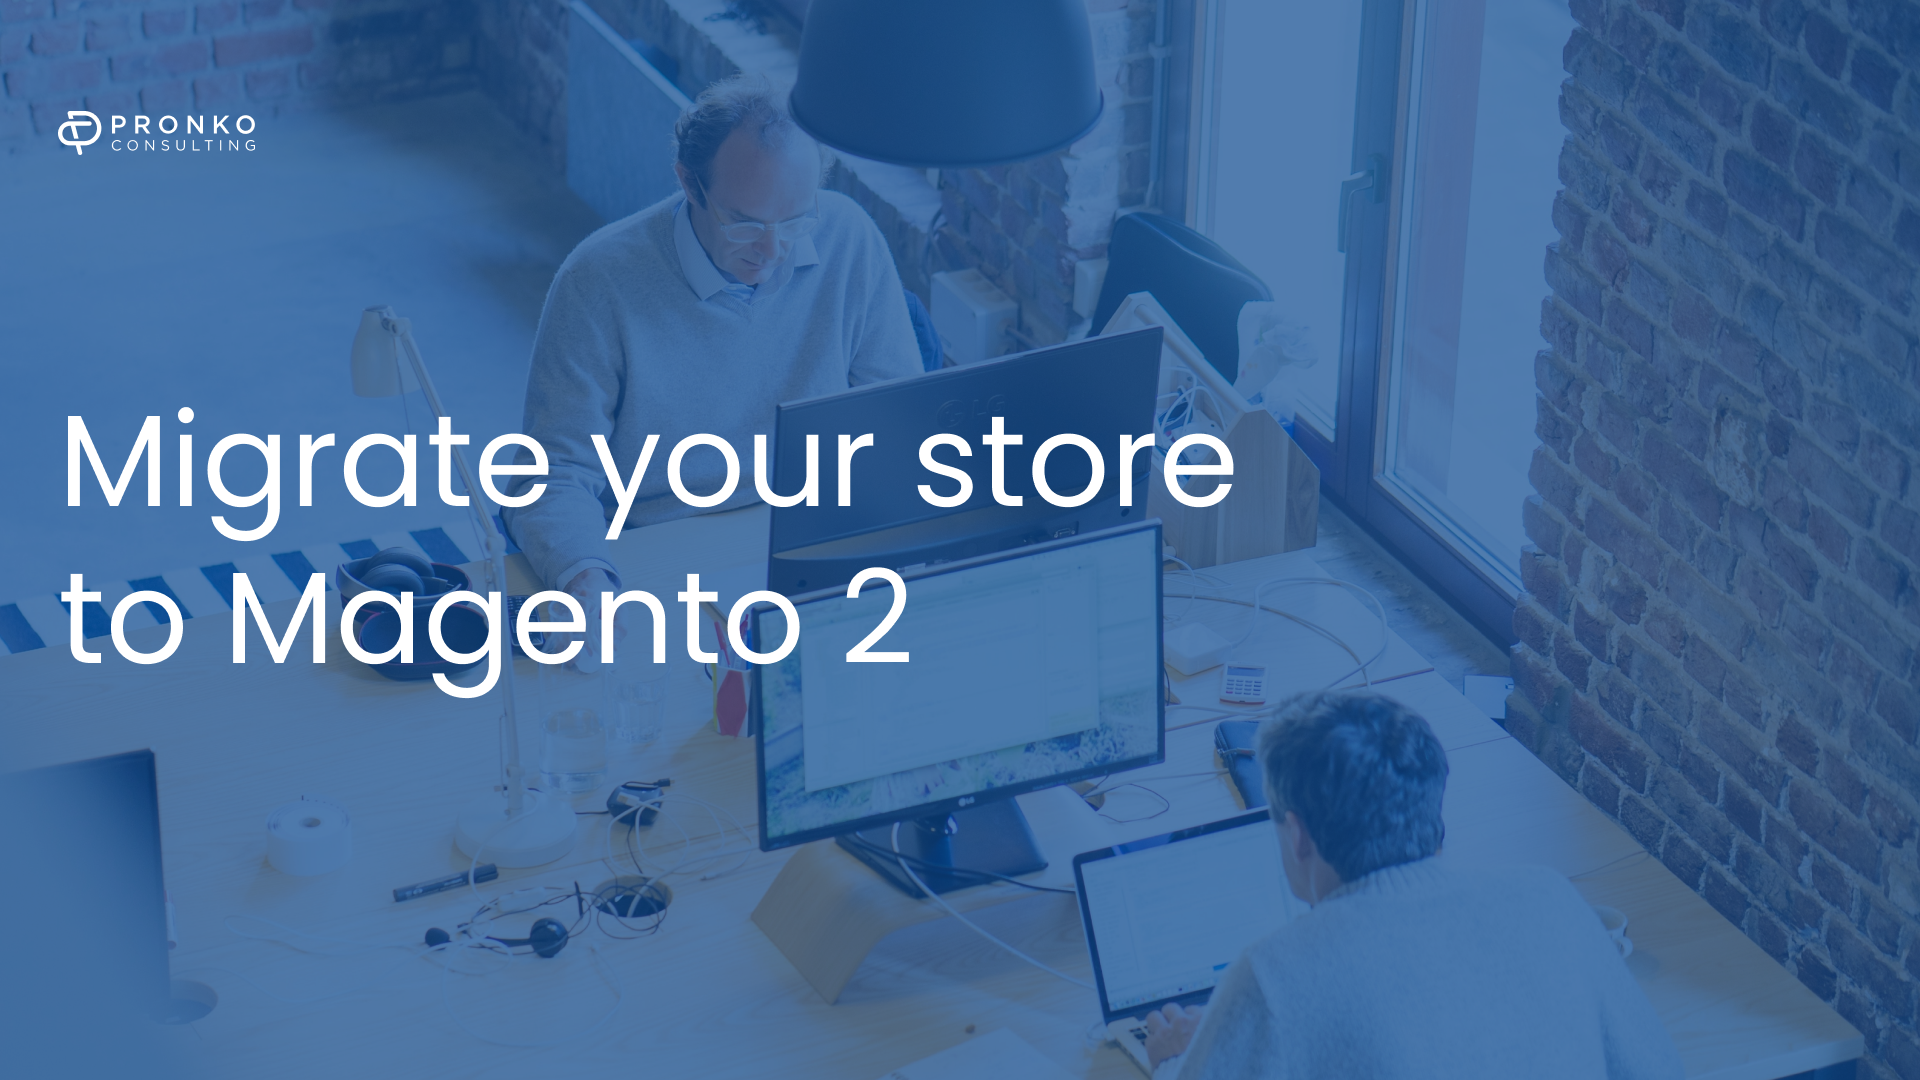 Seamless upgrade: simplifying your eCommerce journey with professional Magento 2 migration services